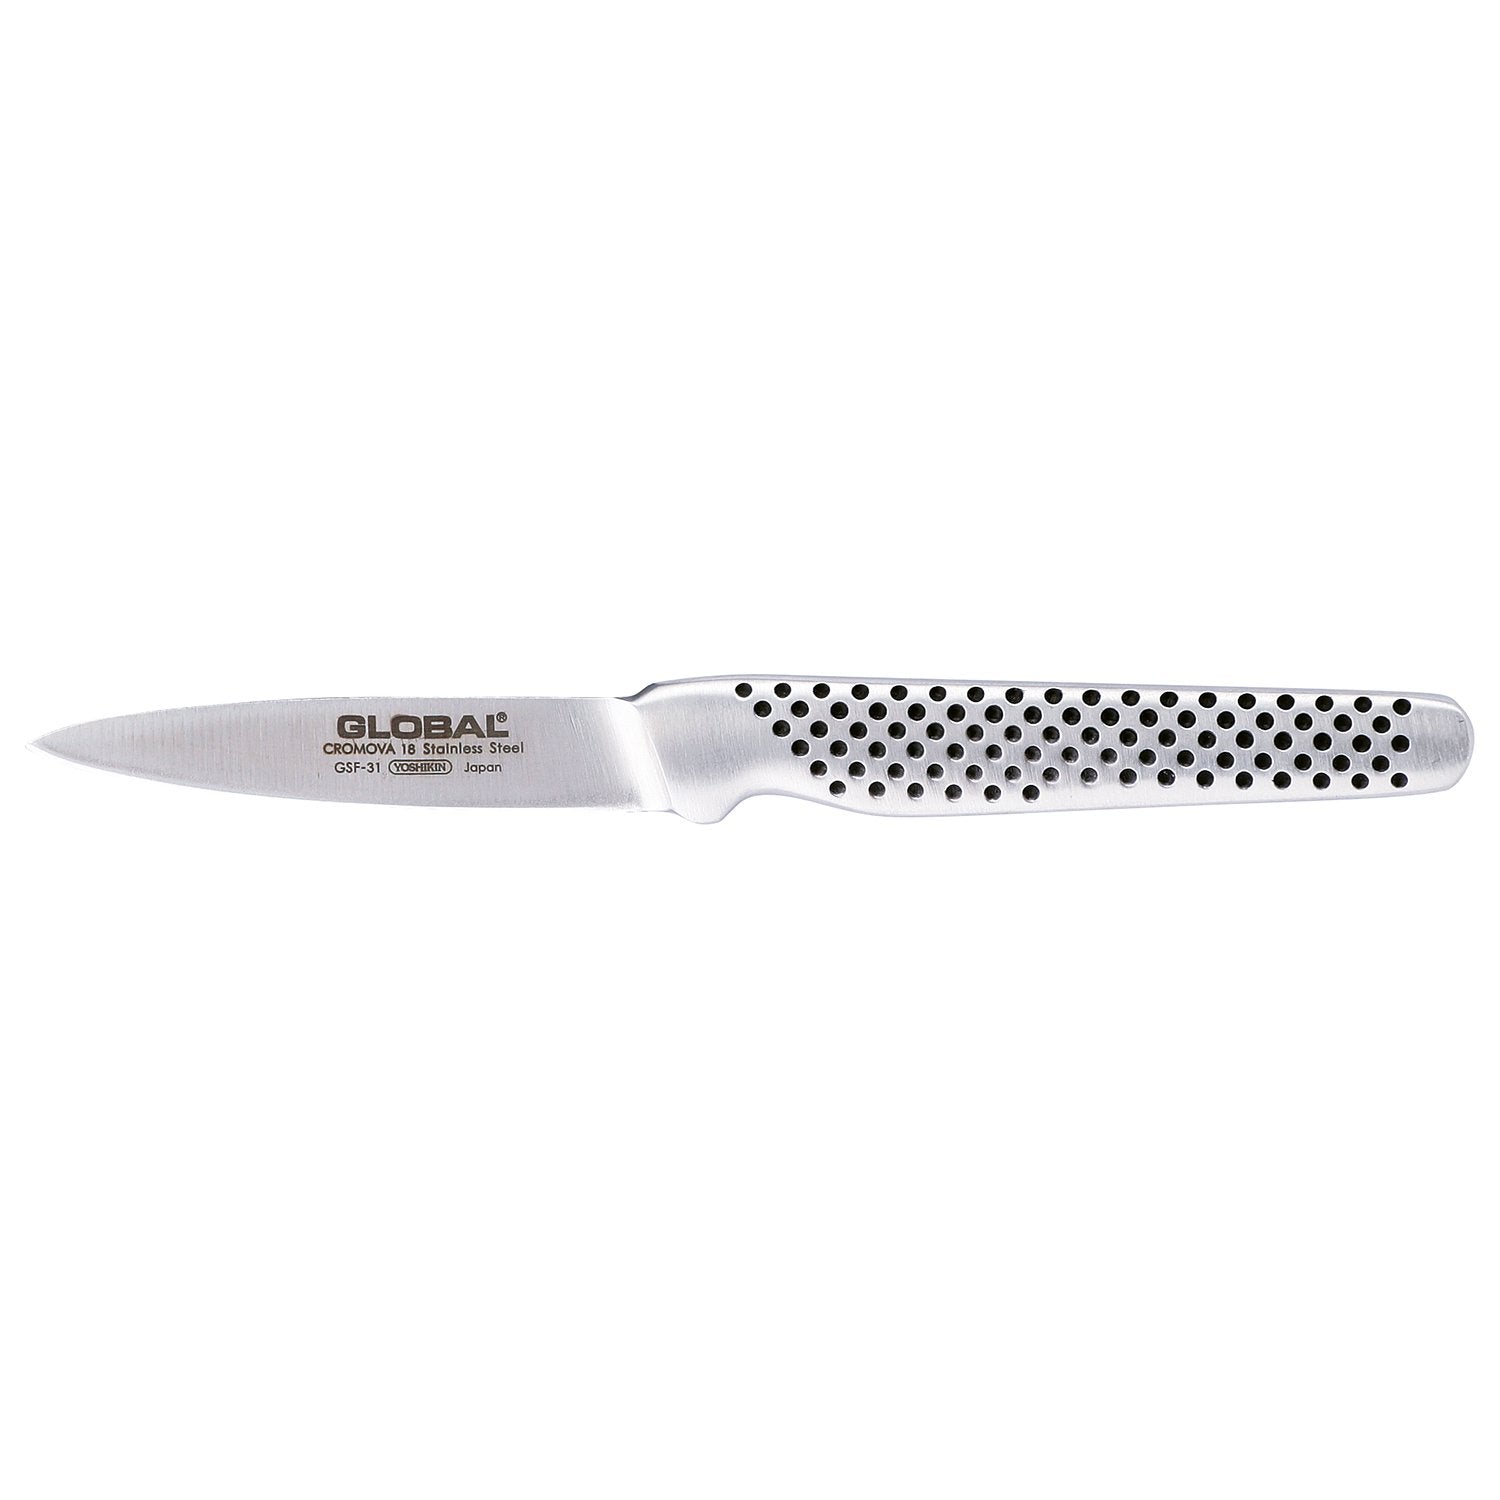 Global Gsf 31 Cleaning Knife, 8 Cm